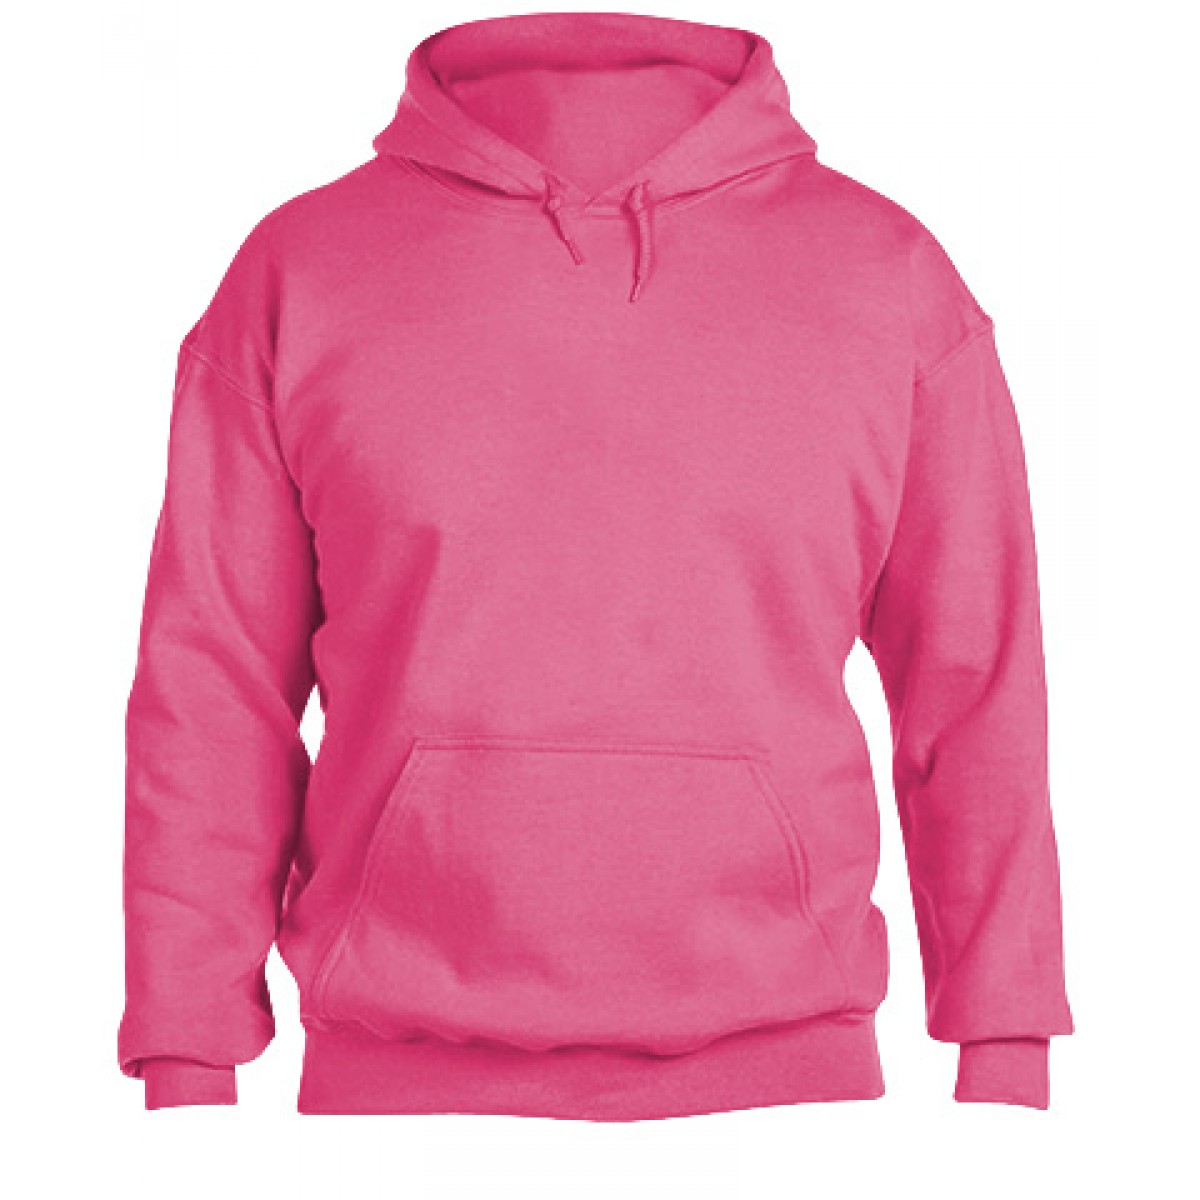 Hooded Sweatshirt 50/50 Heavy Safety Pink-Safety Pink-YL